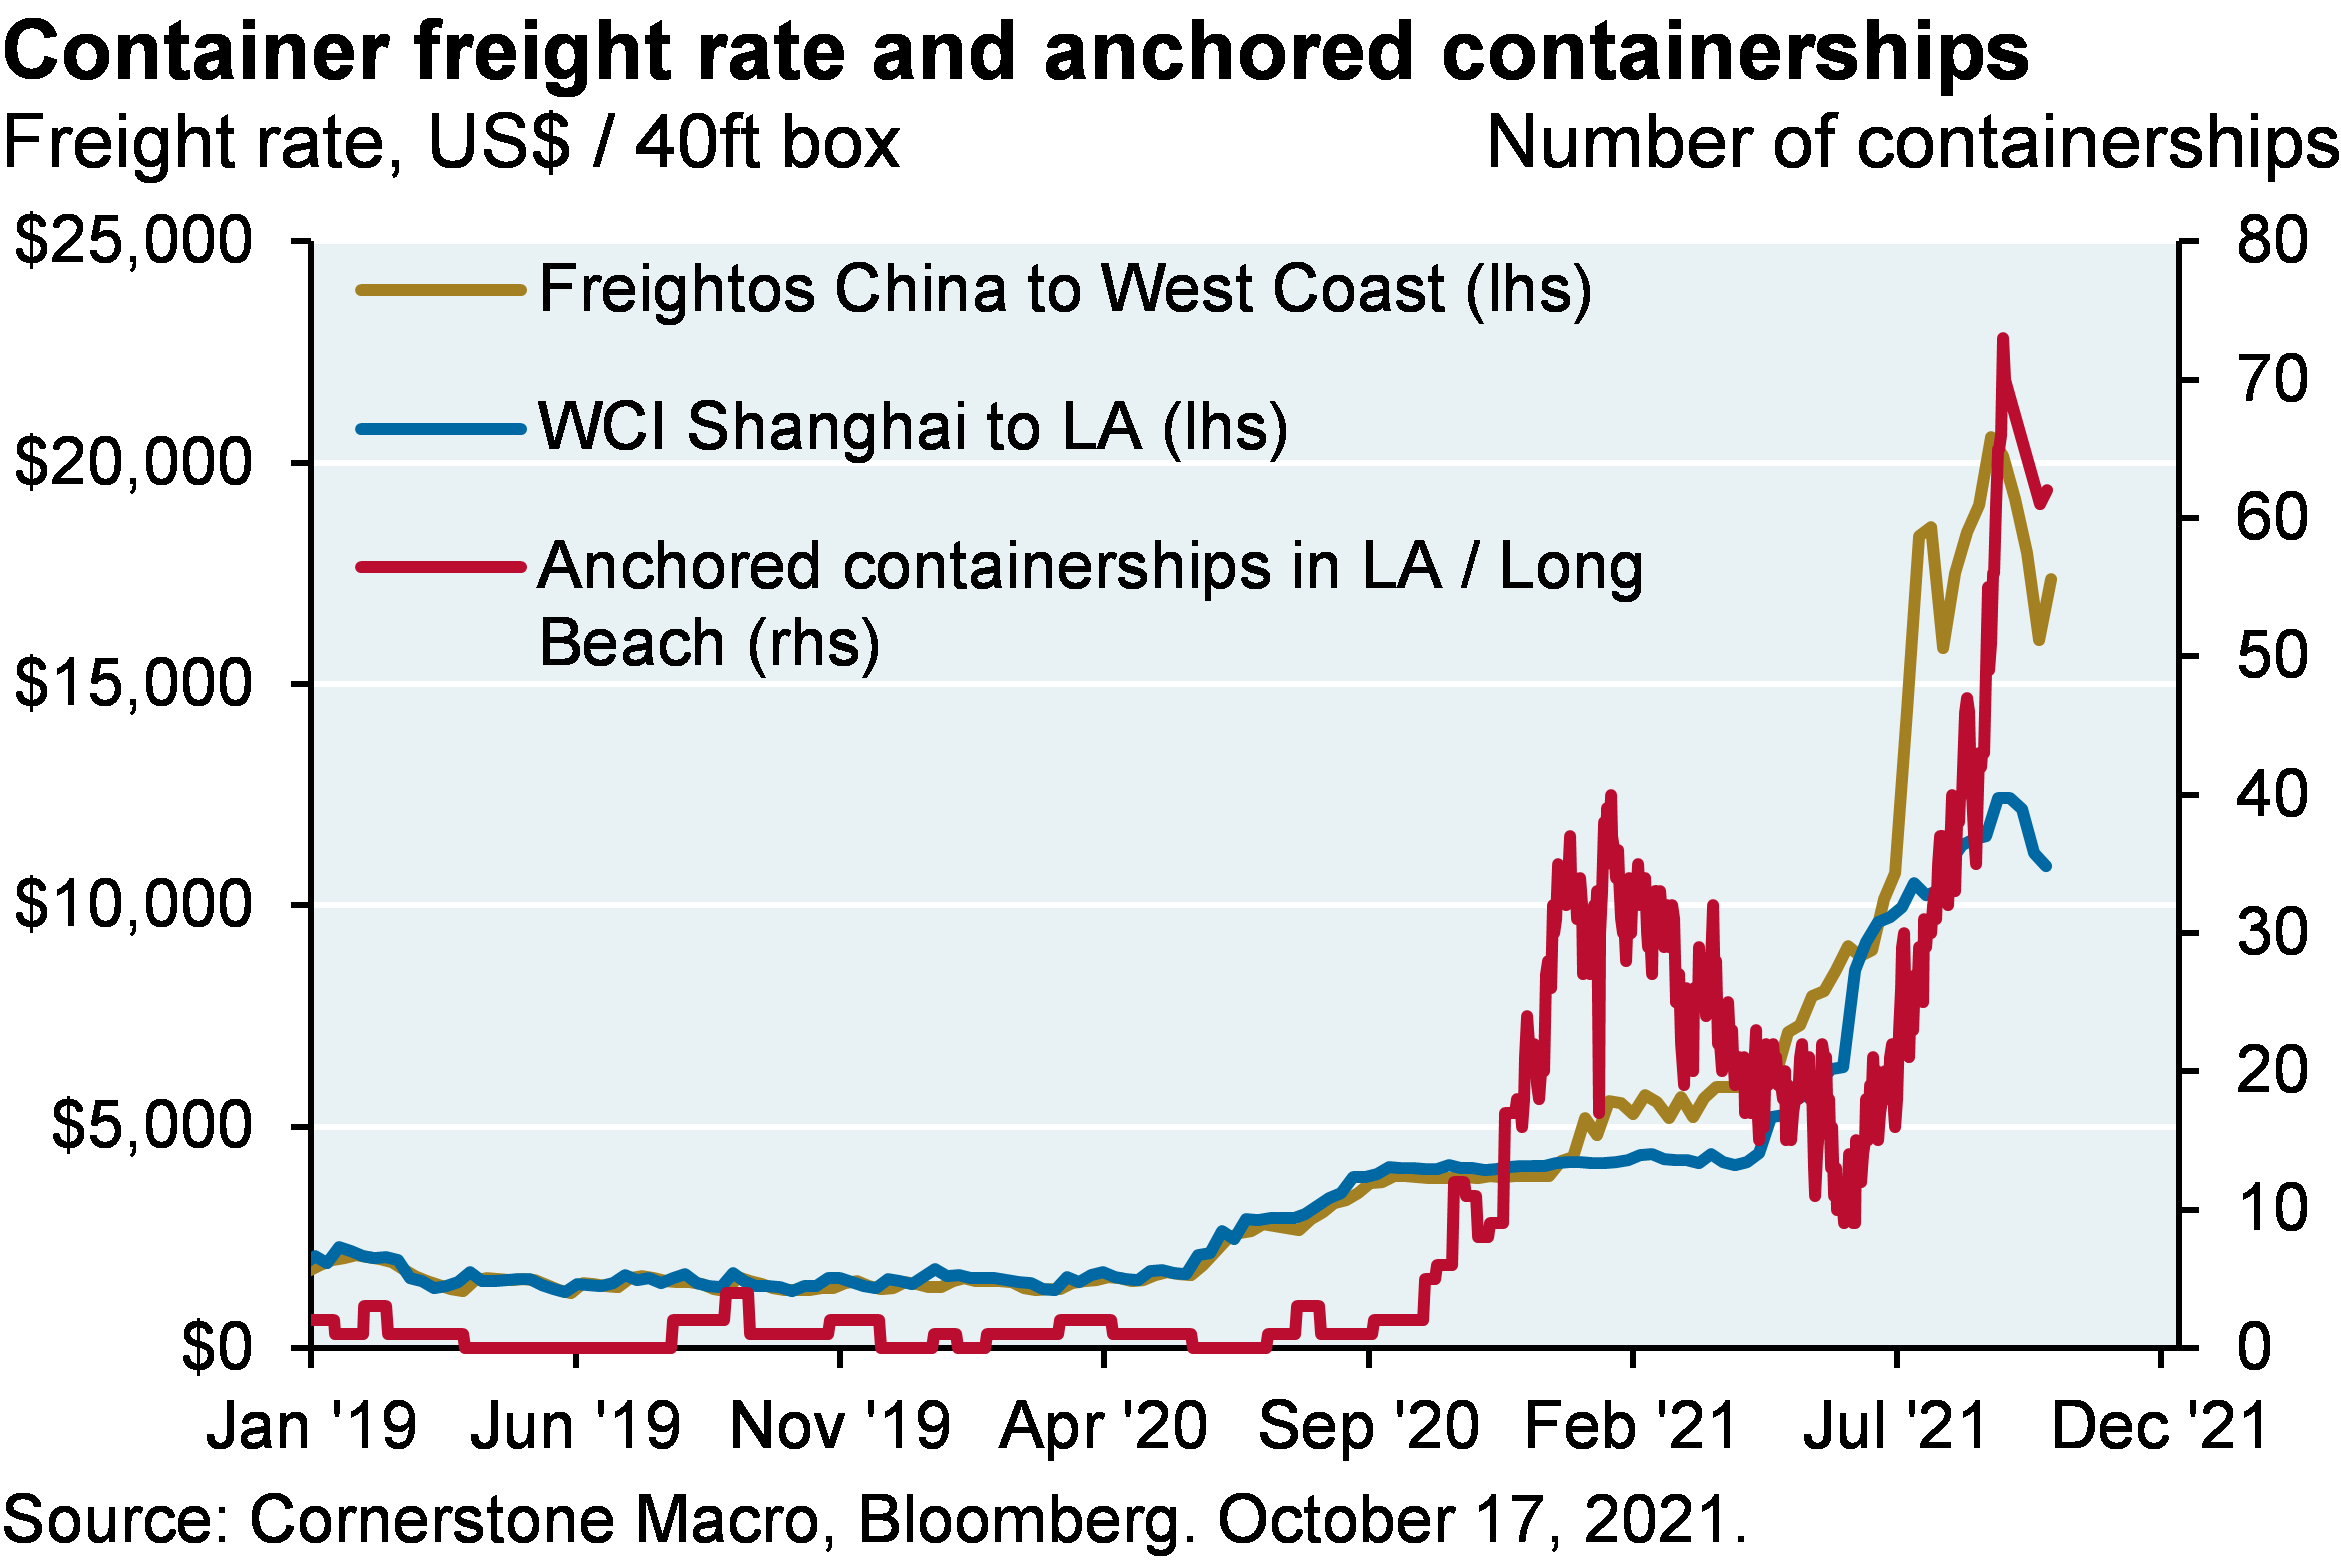 Line chart shows the container freight rate from China to LA/West Coast shown in US$ per 40ft box and anchored containerships since January 2019. While the freight rate remained around $2,000 per 40ft box since 2019, in late 2020 the freight rate began increasing. The Freightos China to West Coast freight rate steadily increased to just over $20,000 per 40ft box, though it has recently declined to around $17,000. The WCI Shanghai to LA index increased to its latest value of around $13,000. Anchored containerships have also steadily increased from historically low levels, with around 60 containerships anchored at the latest point in October.